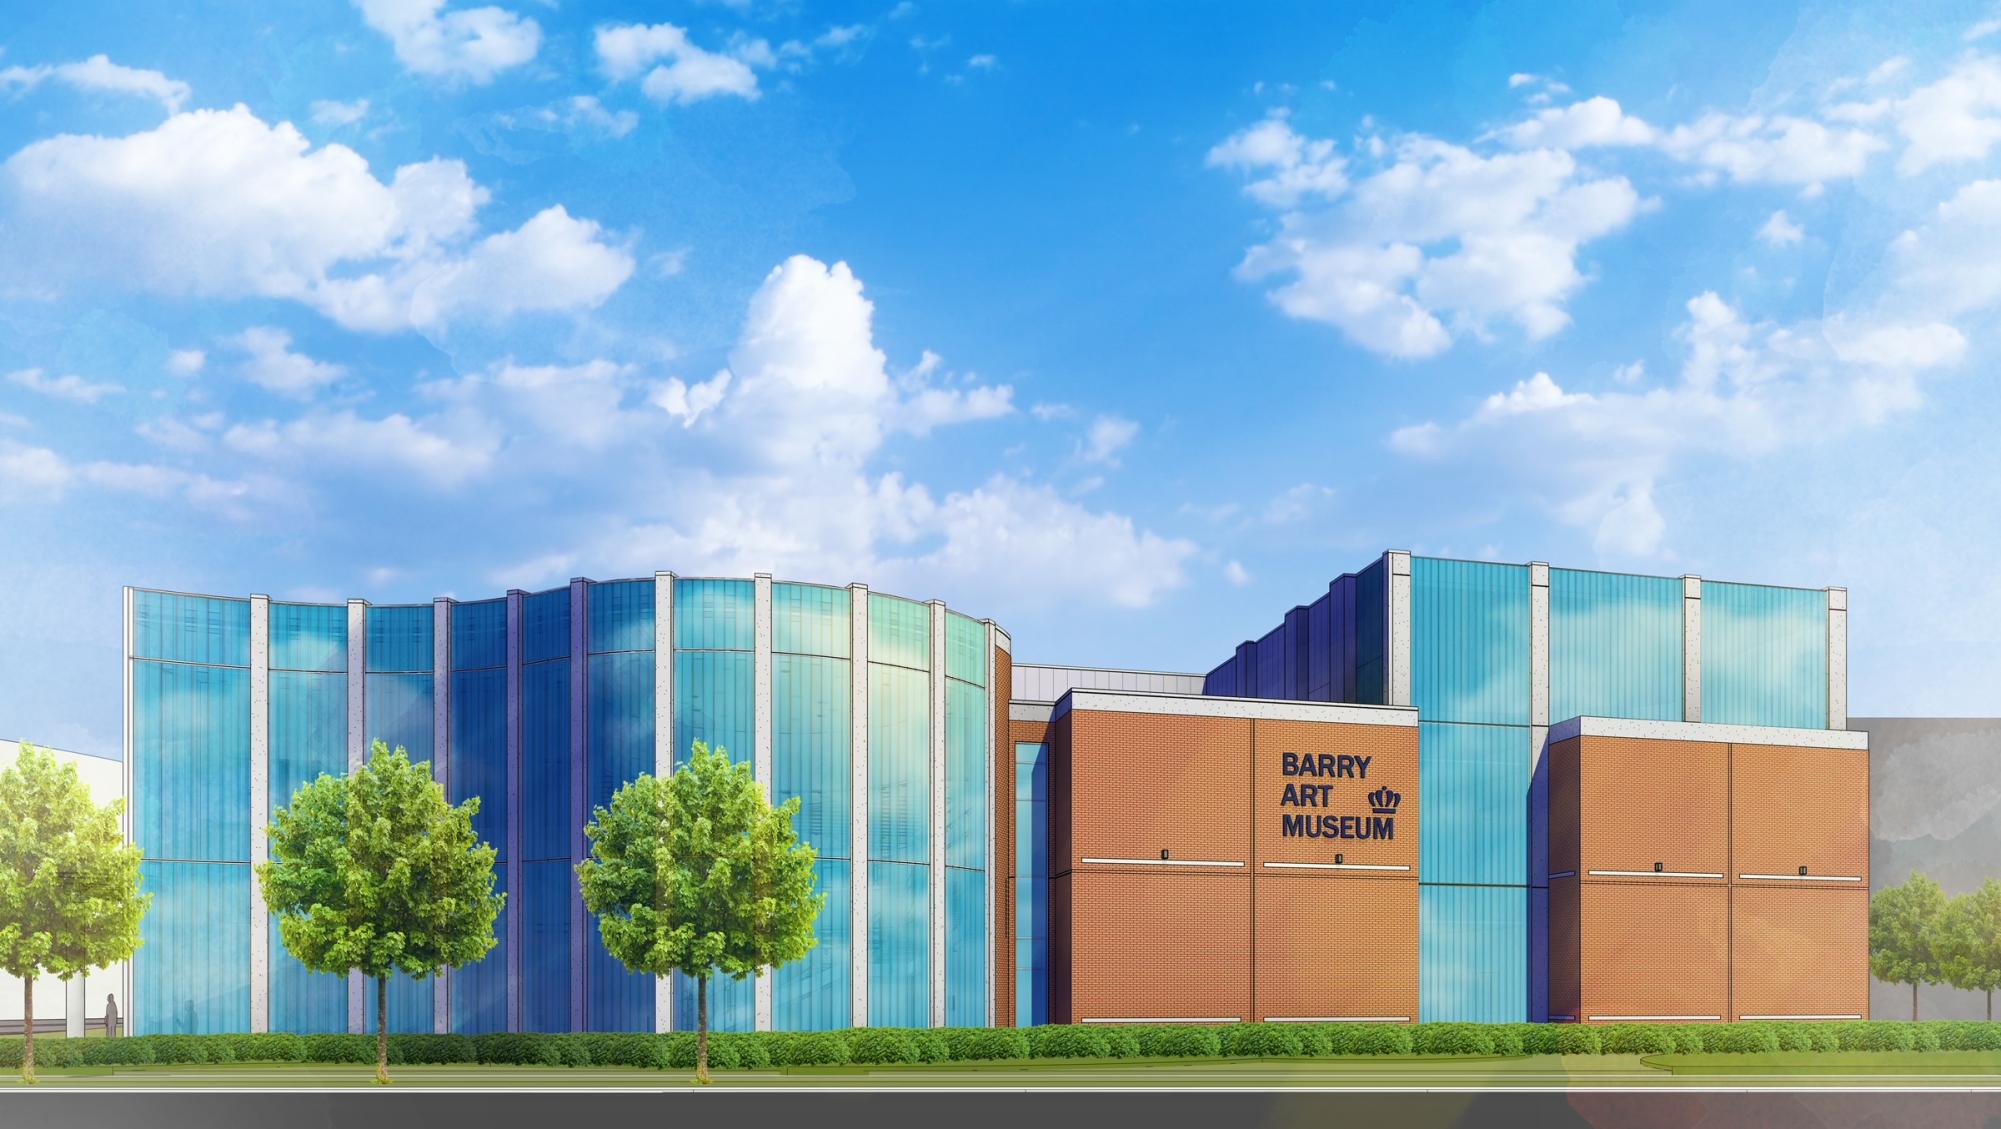 The Barry Art Museum is located off of Hampton Blvd. at the entrance to the university. Pictured is an architectural rendering of the expansion project done by Saunders + Crouse Architects. 